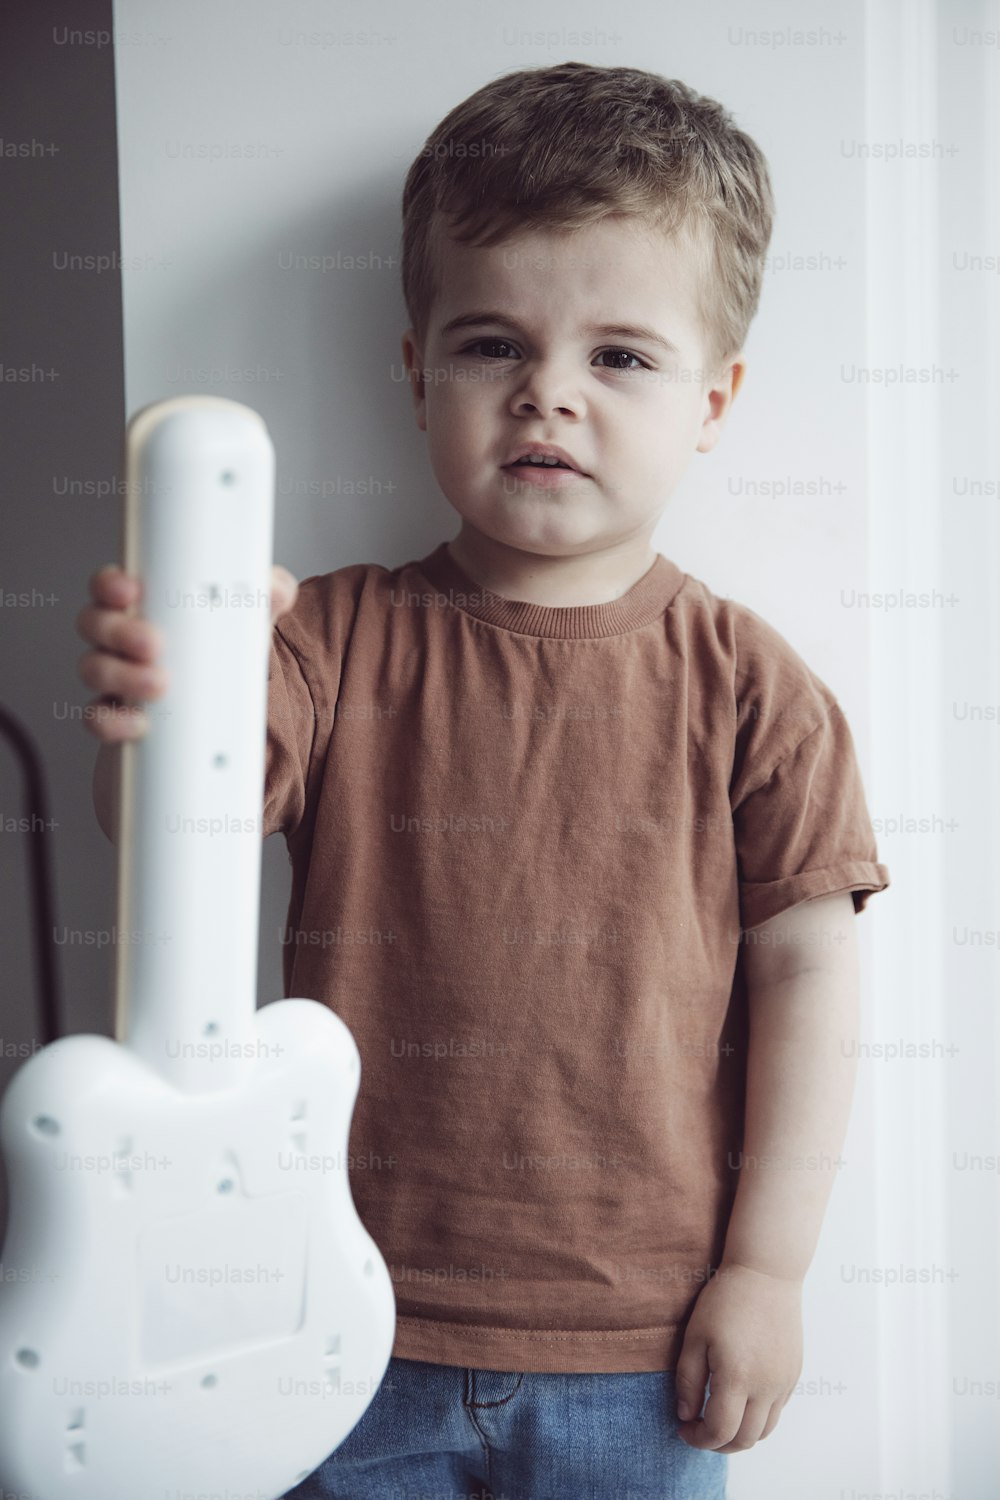 a young boy holding a white guitar shaped object